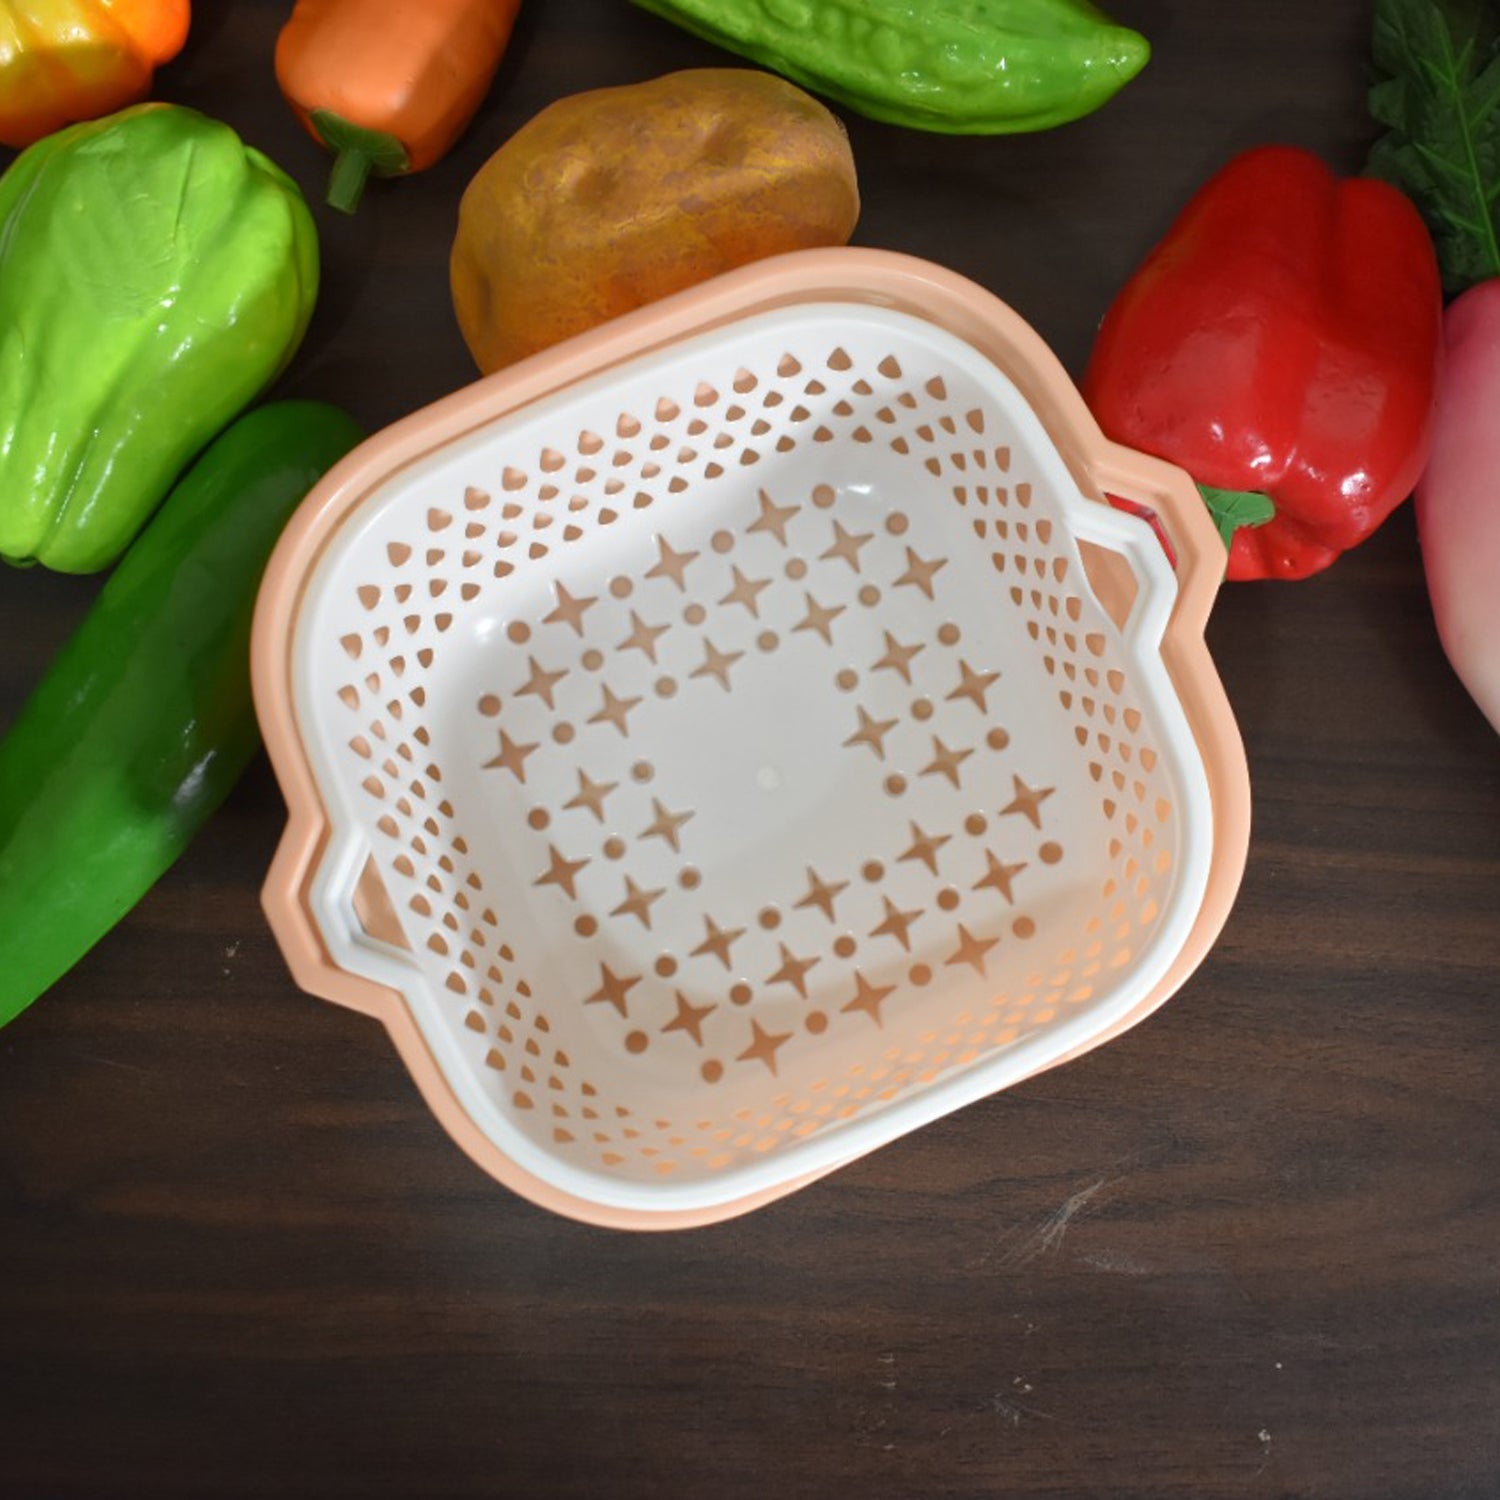 2785 2 In 1 Basket Strainer To Rinse Various Types Of Items Like Fruits, Vegetables Etc. DeoDap